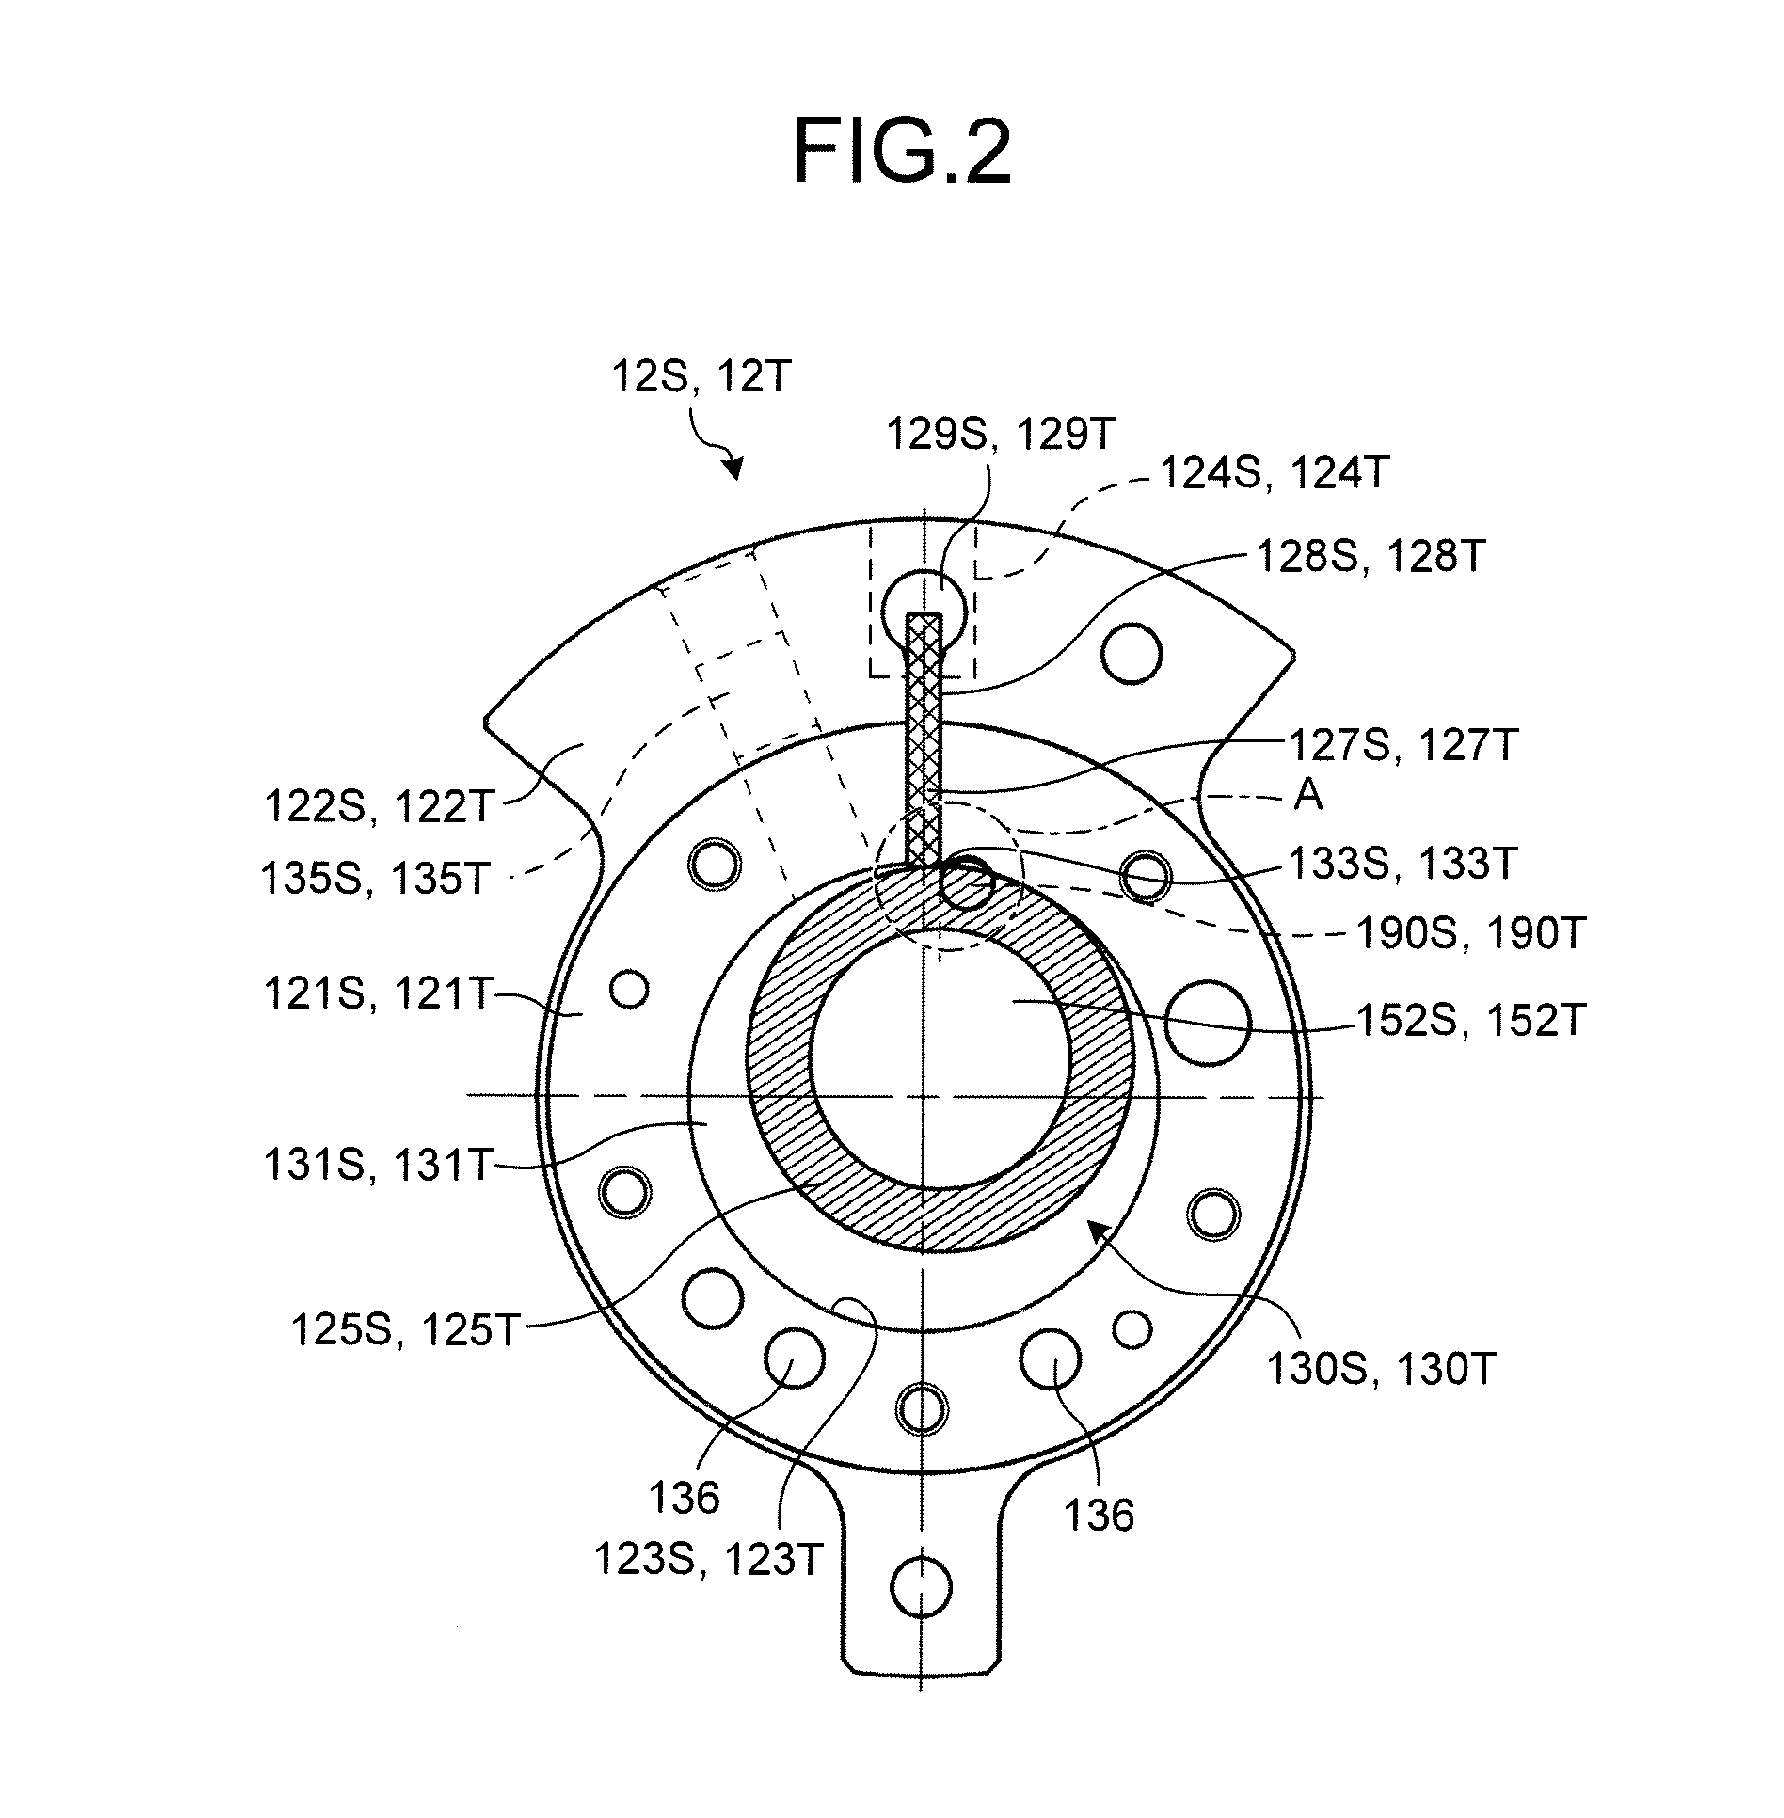 Rotary compressor having discharge groove to communicate compression chamber with discharge port near vane groove